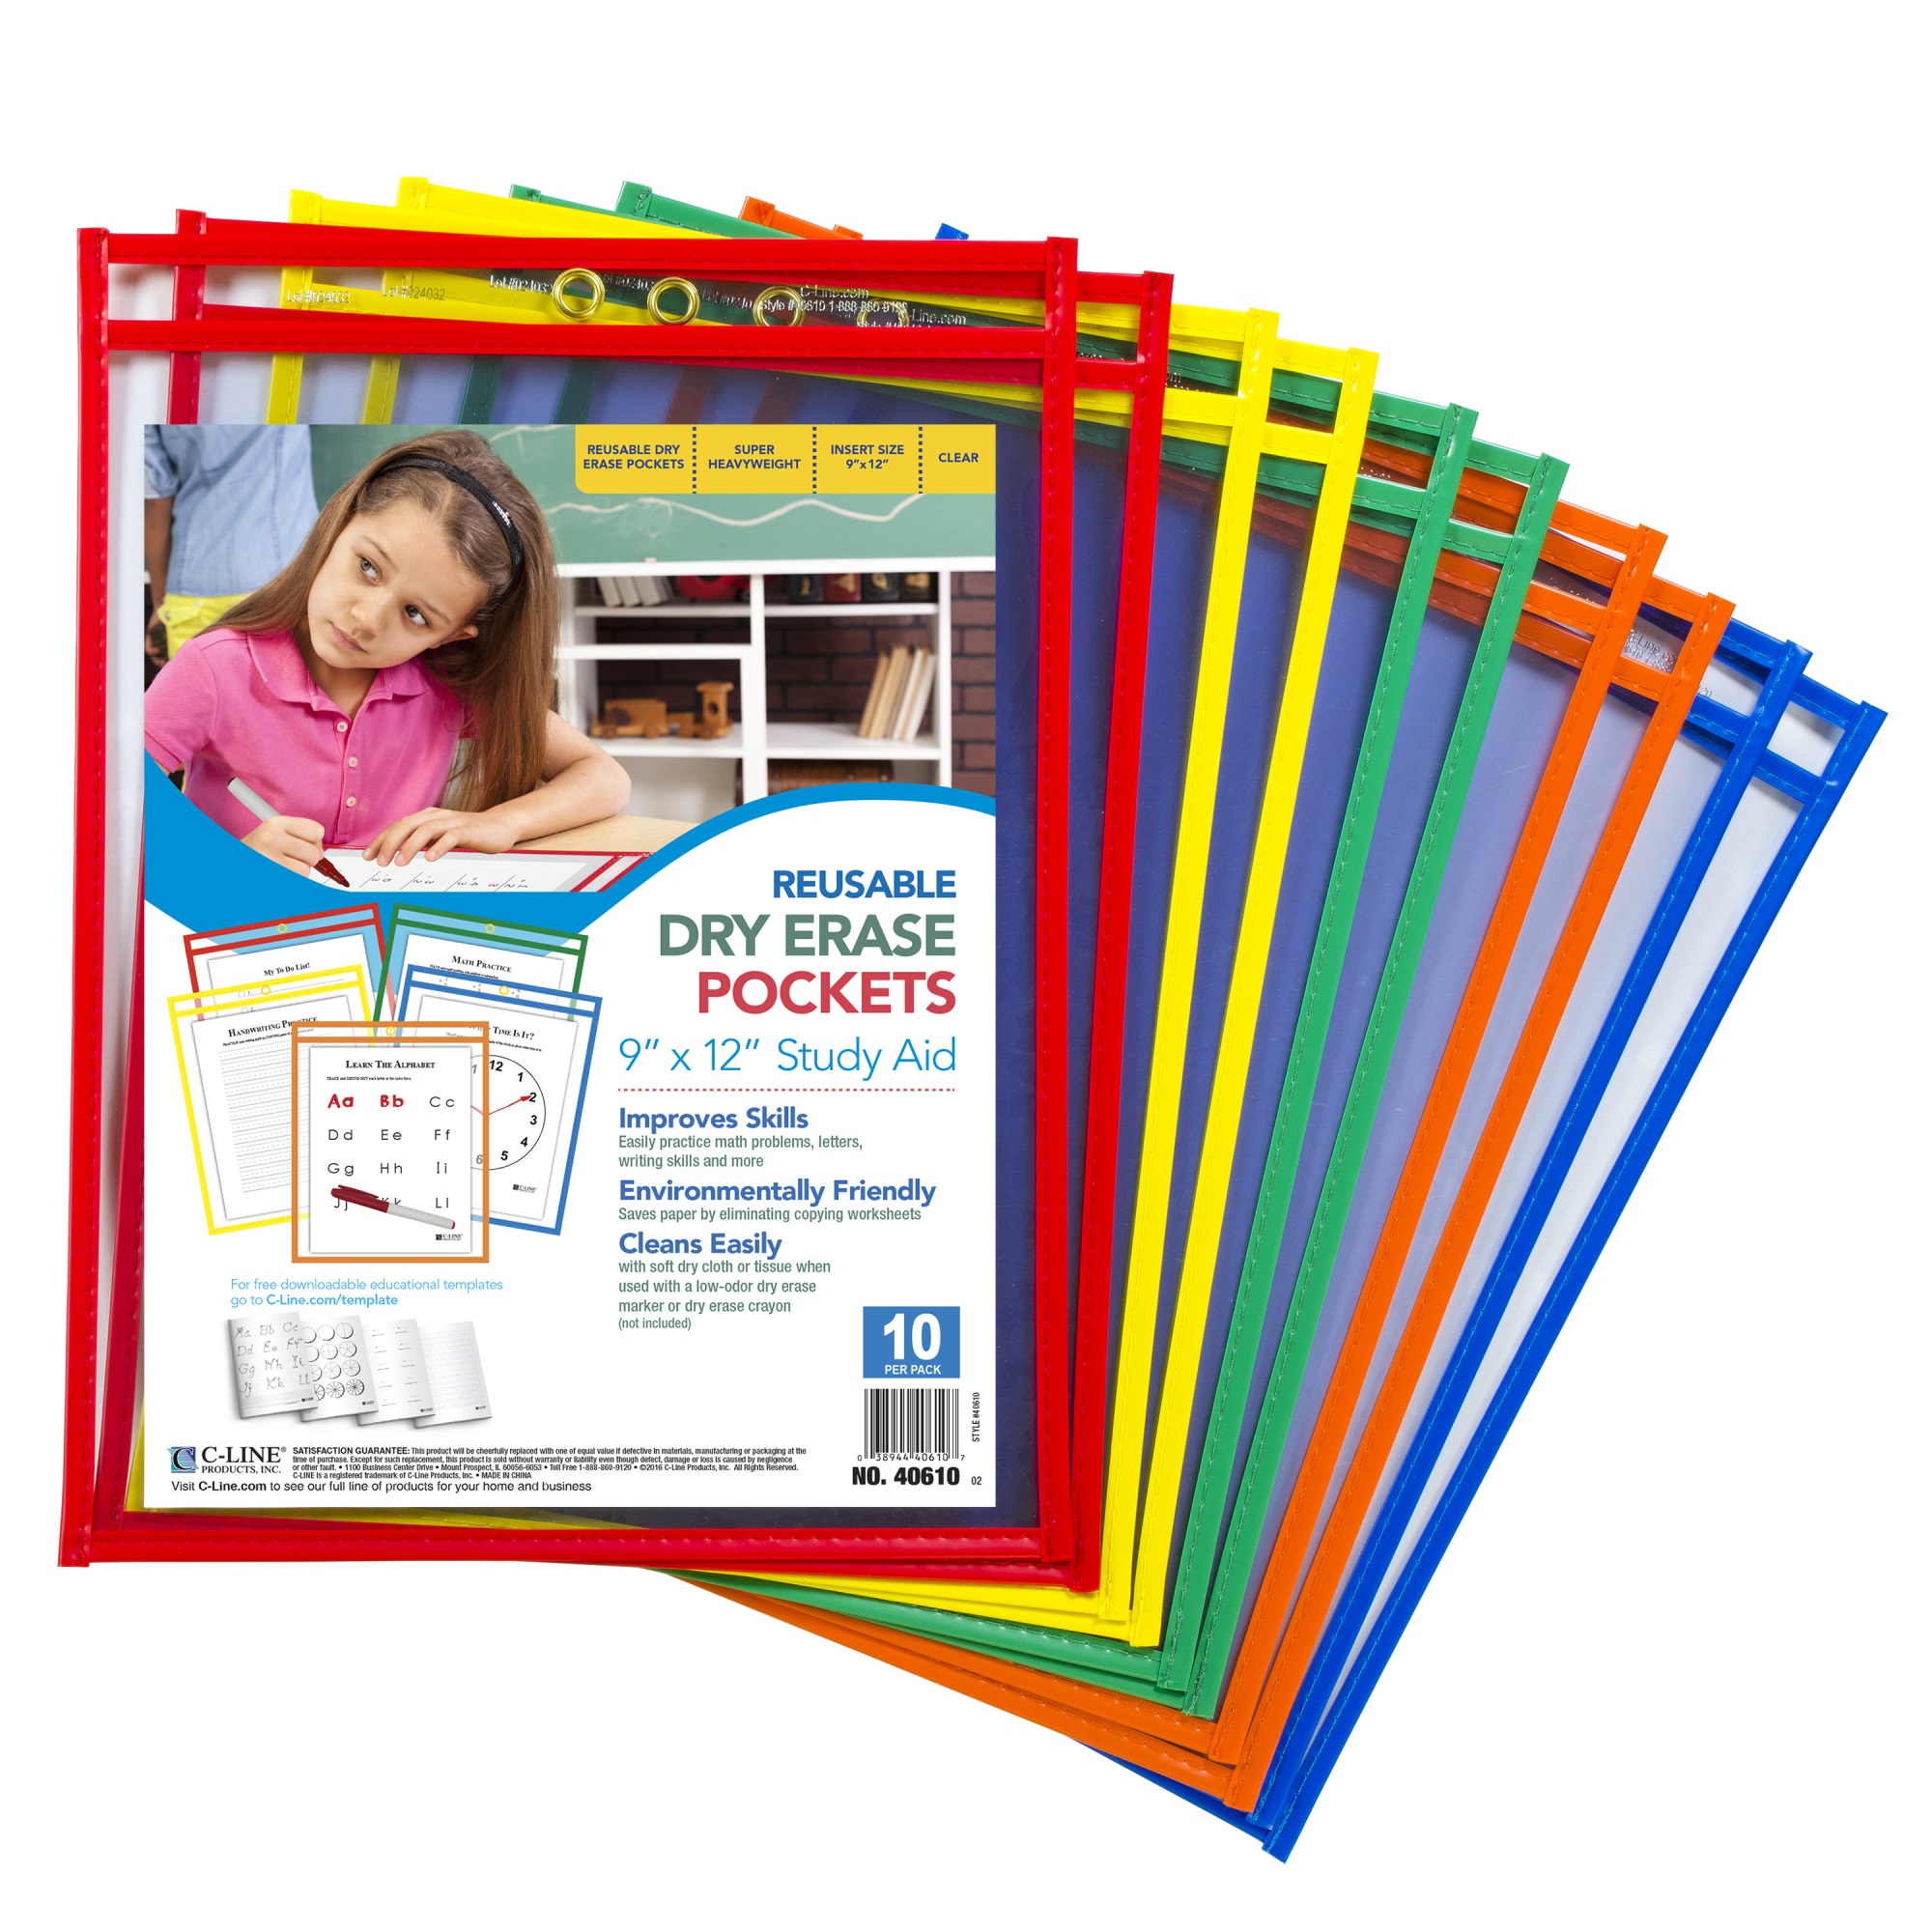 C-Line Reusable Dry Erase Pockets, Assorted Primary Colors, 9 x 12, 10/PK, 40610